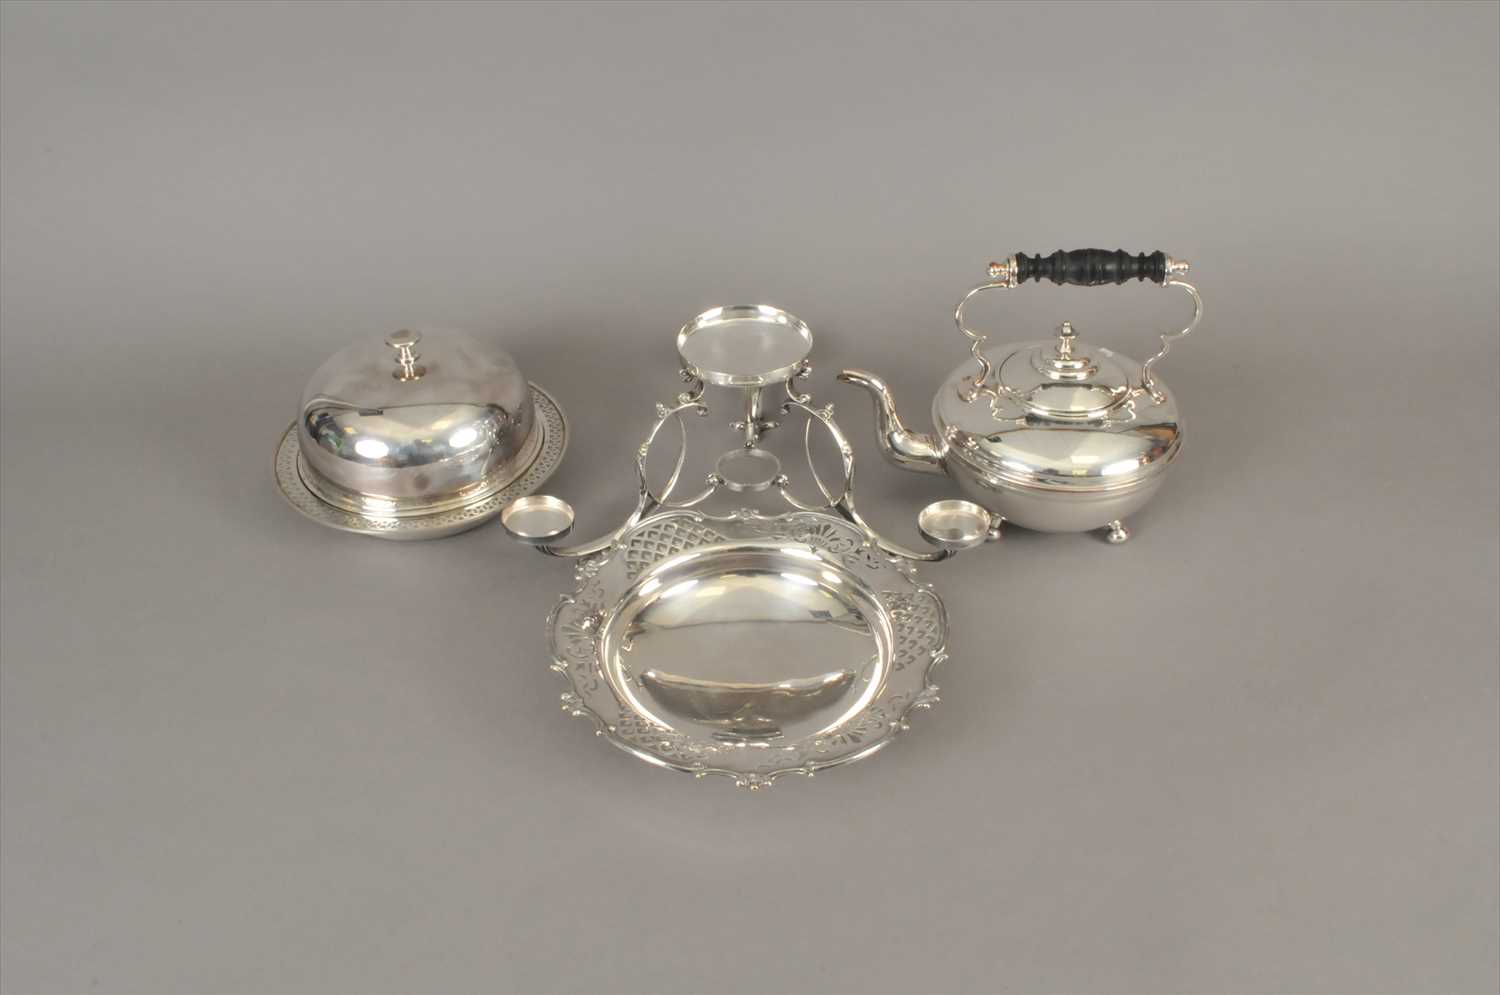 Lot 15 - A large collection of silver plated wares